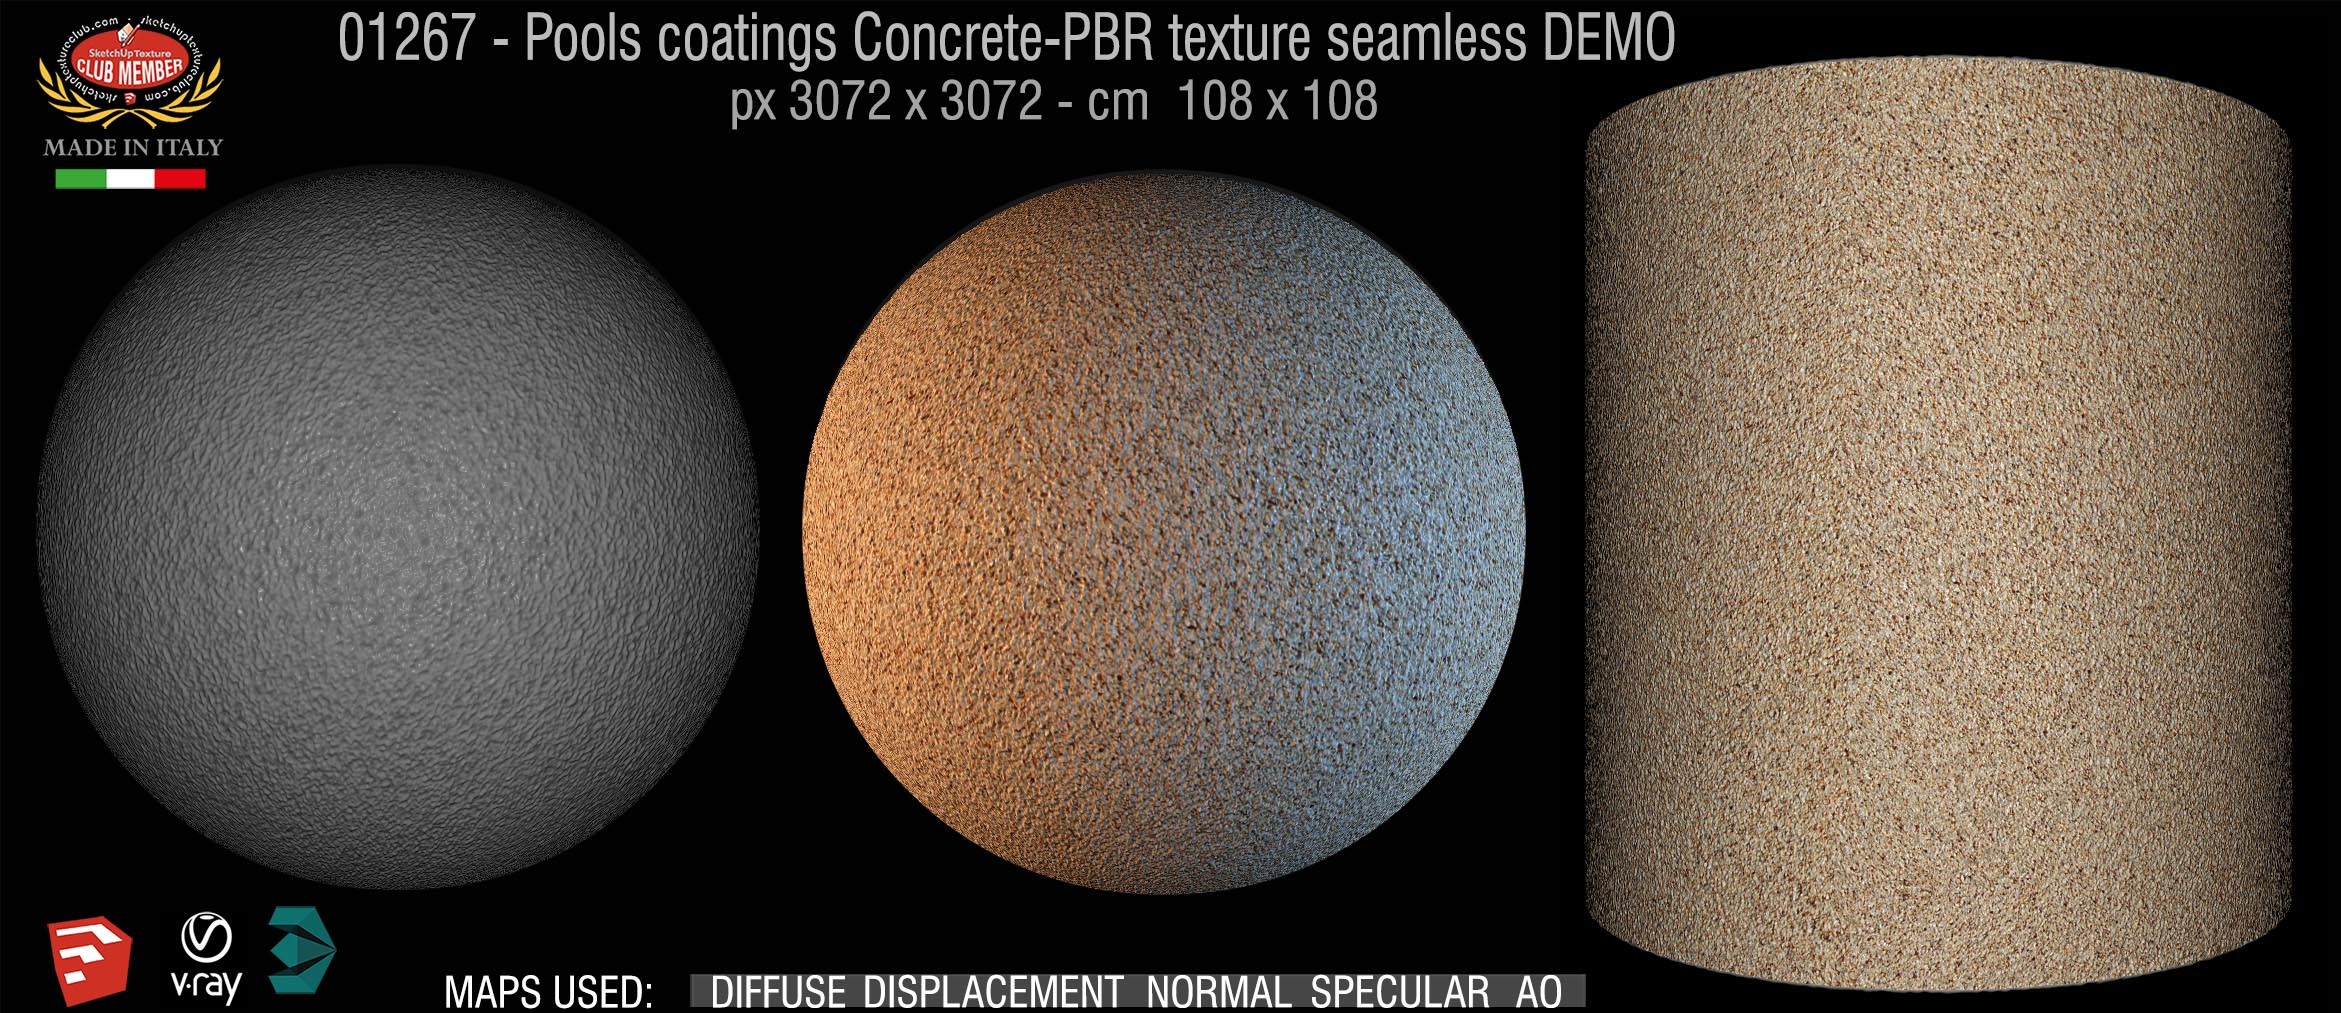 01267 Pools coatings Concrete-PBR texture seamless DEMO